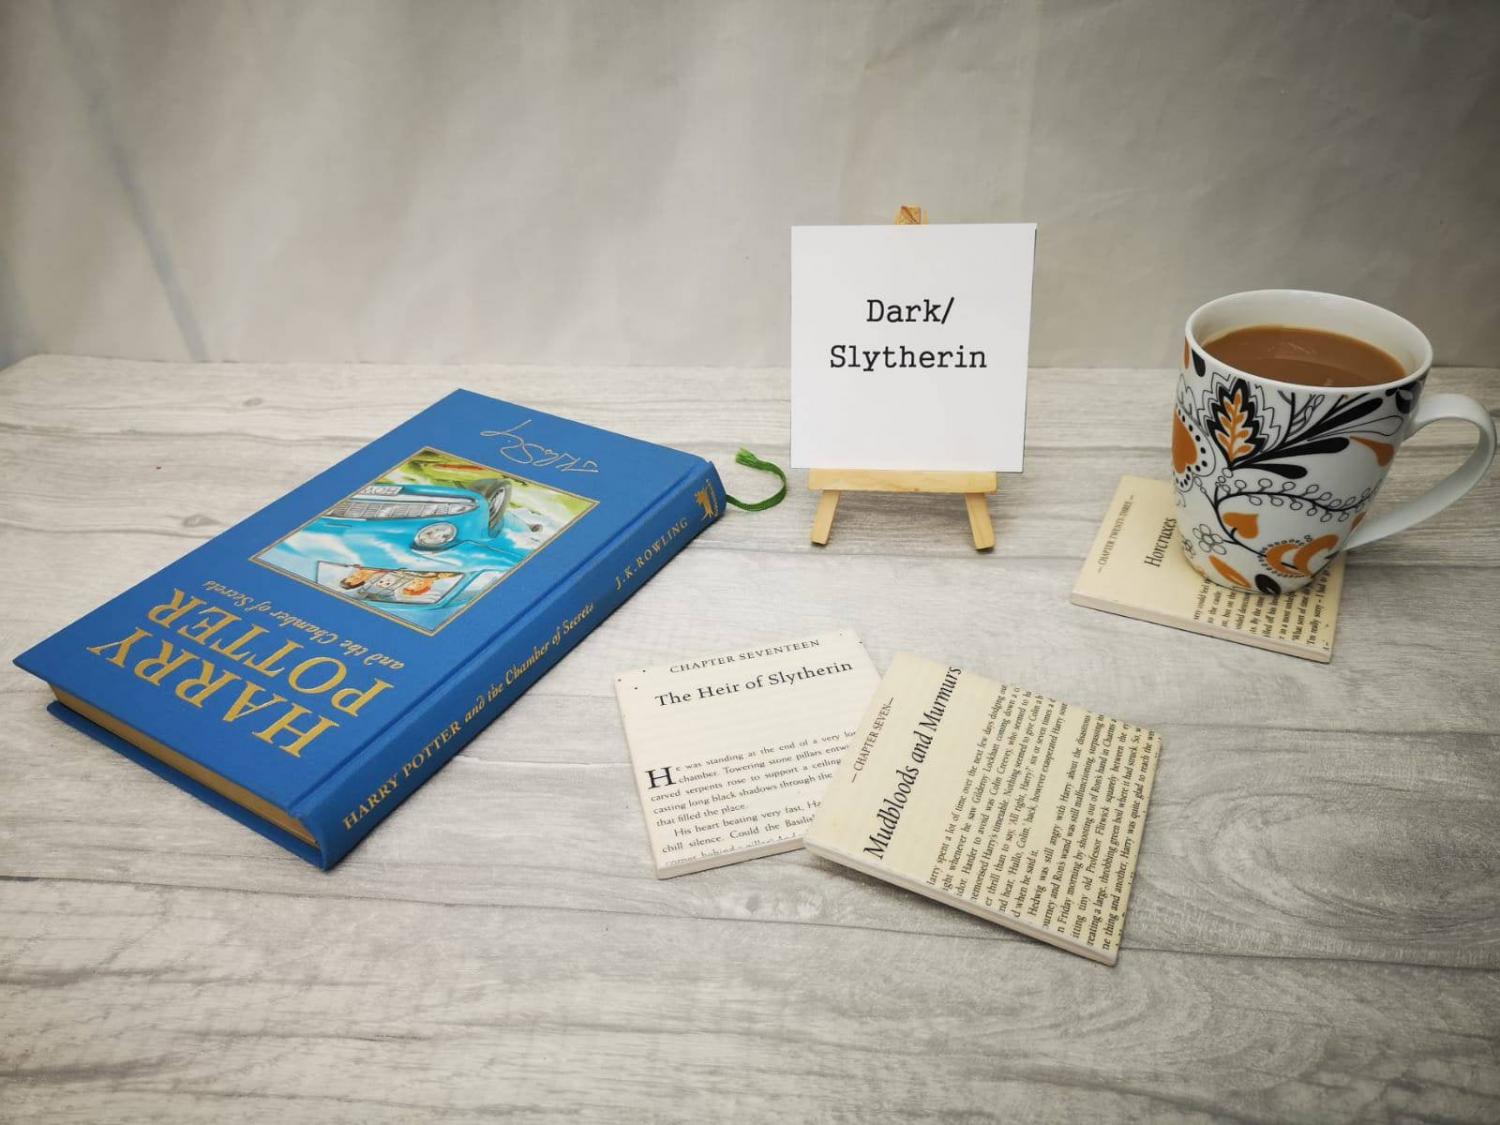 Harry Potter Novel Coasters Let You Read a Page Every Time You Put Your Cup Down